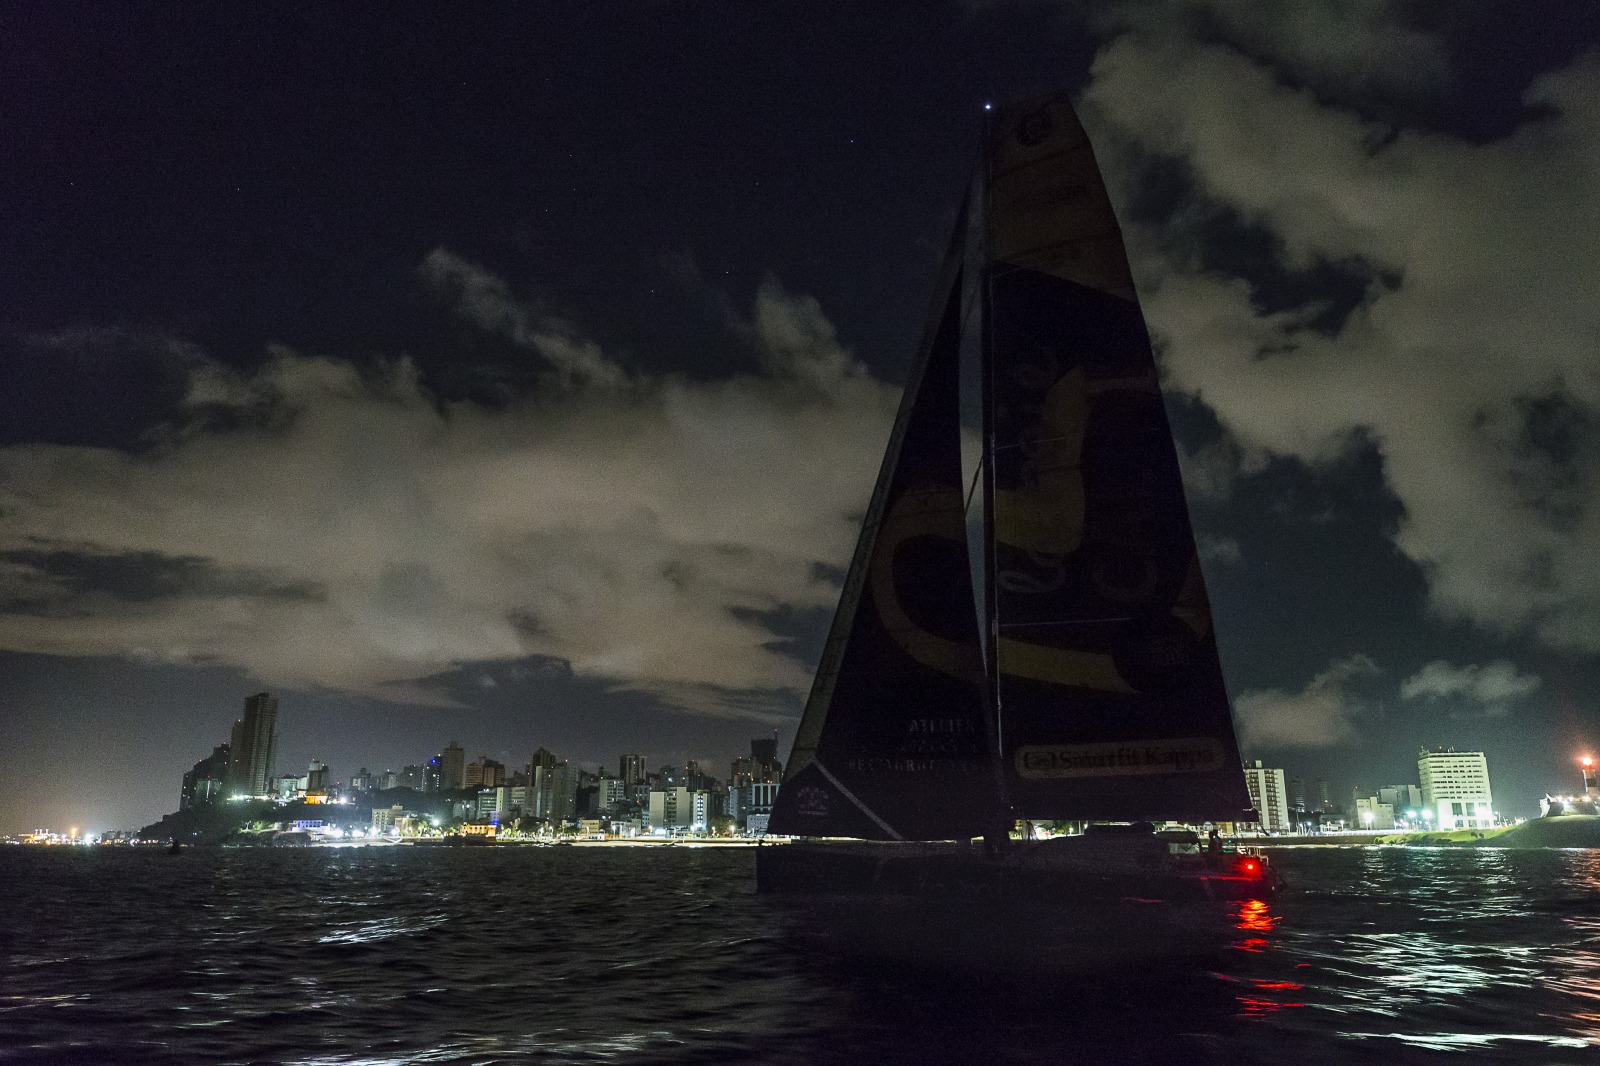  IMOCA Open 60, Class 40, Multi 50, Ultime  Transat Jacques Vabre  Le Havre FRA  Day 17, the Swiss